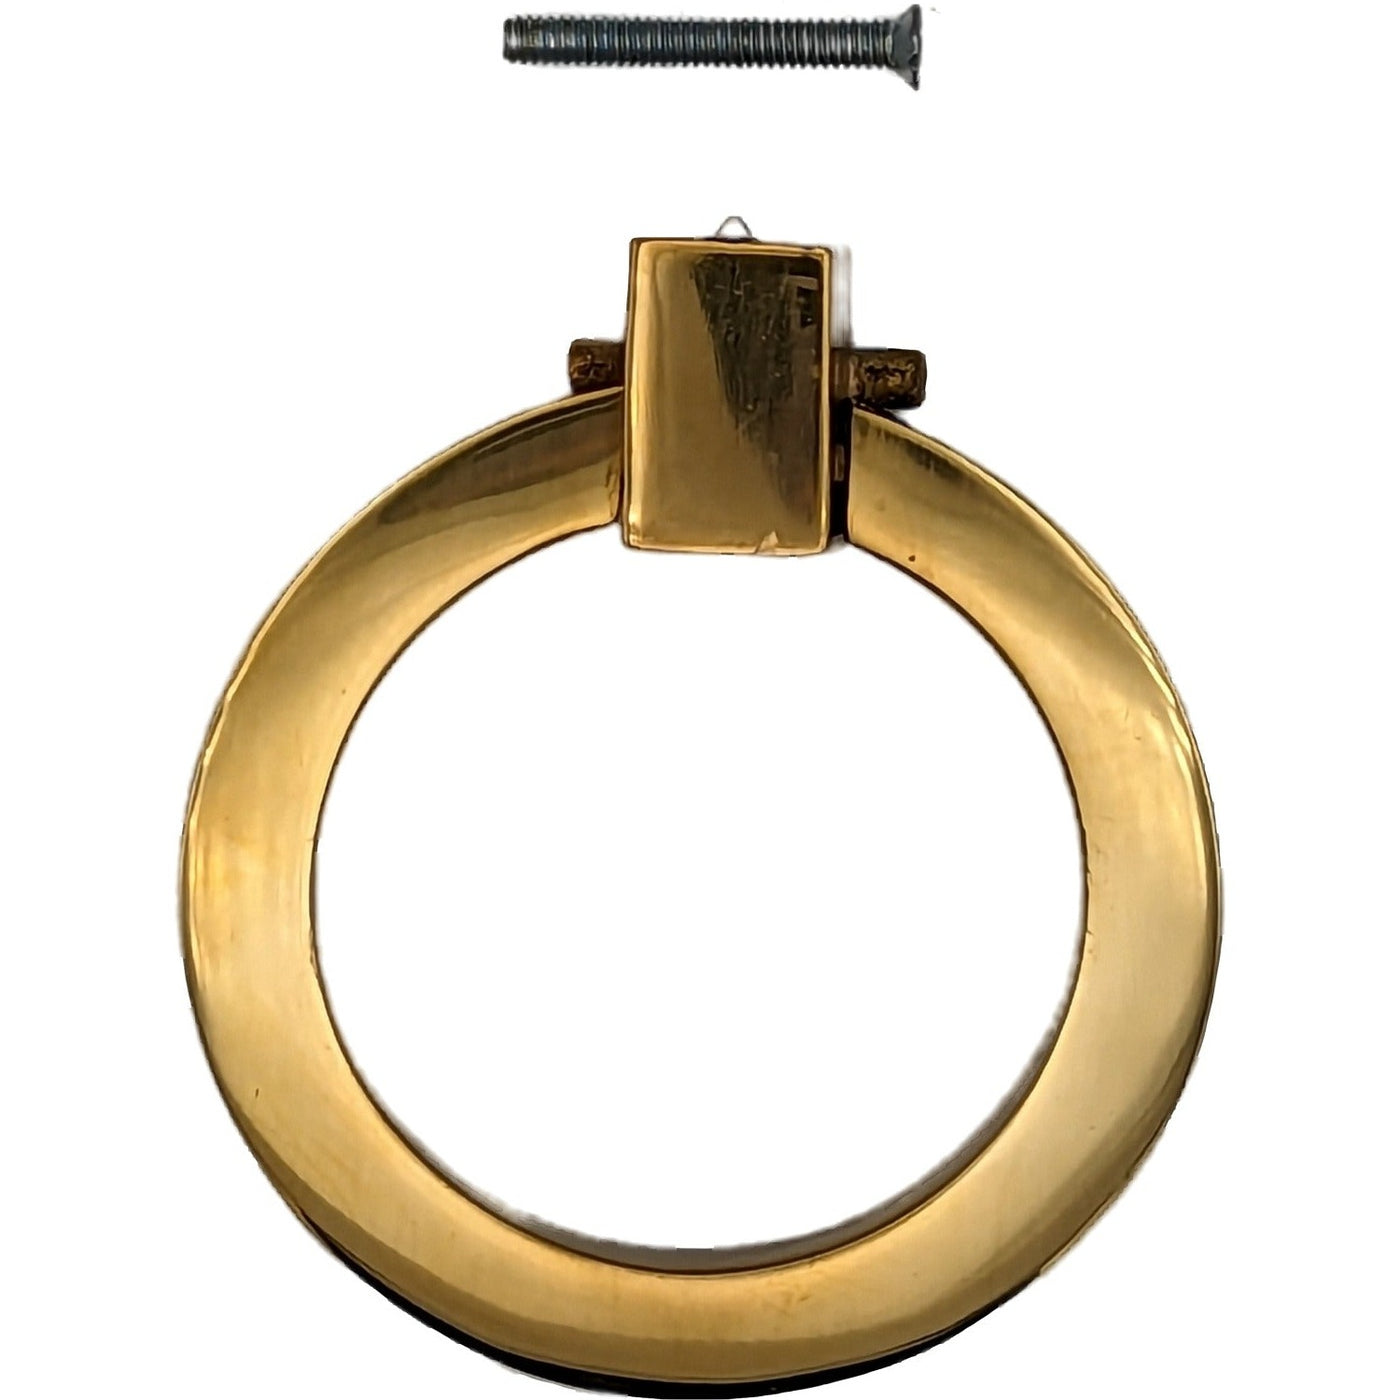 3 Inch Mission Style Solid Brass Drawer Ring Pull (Several Finishes Available)